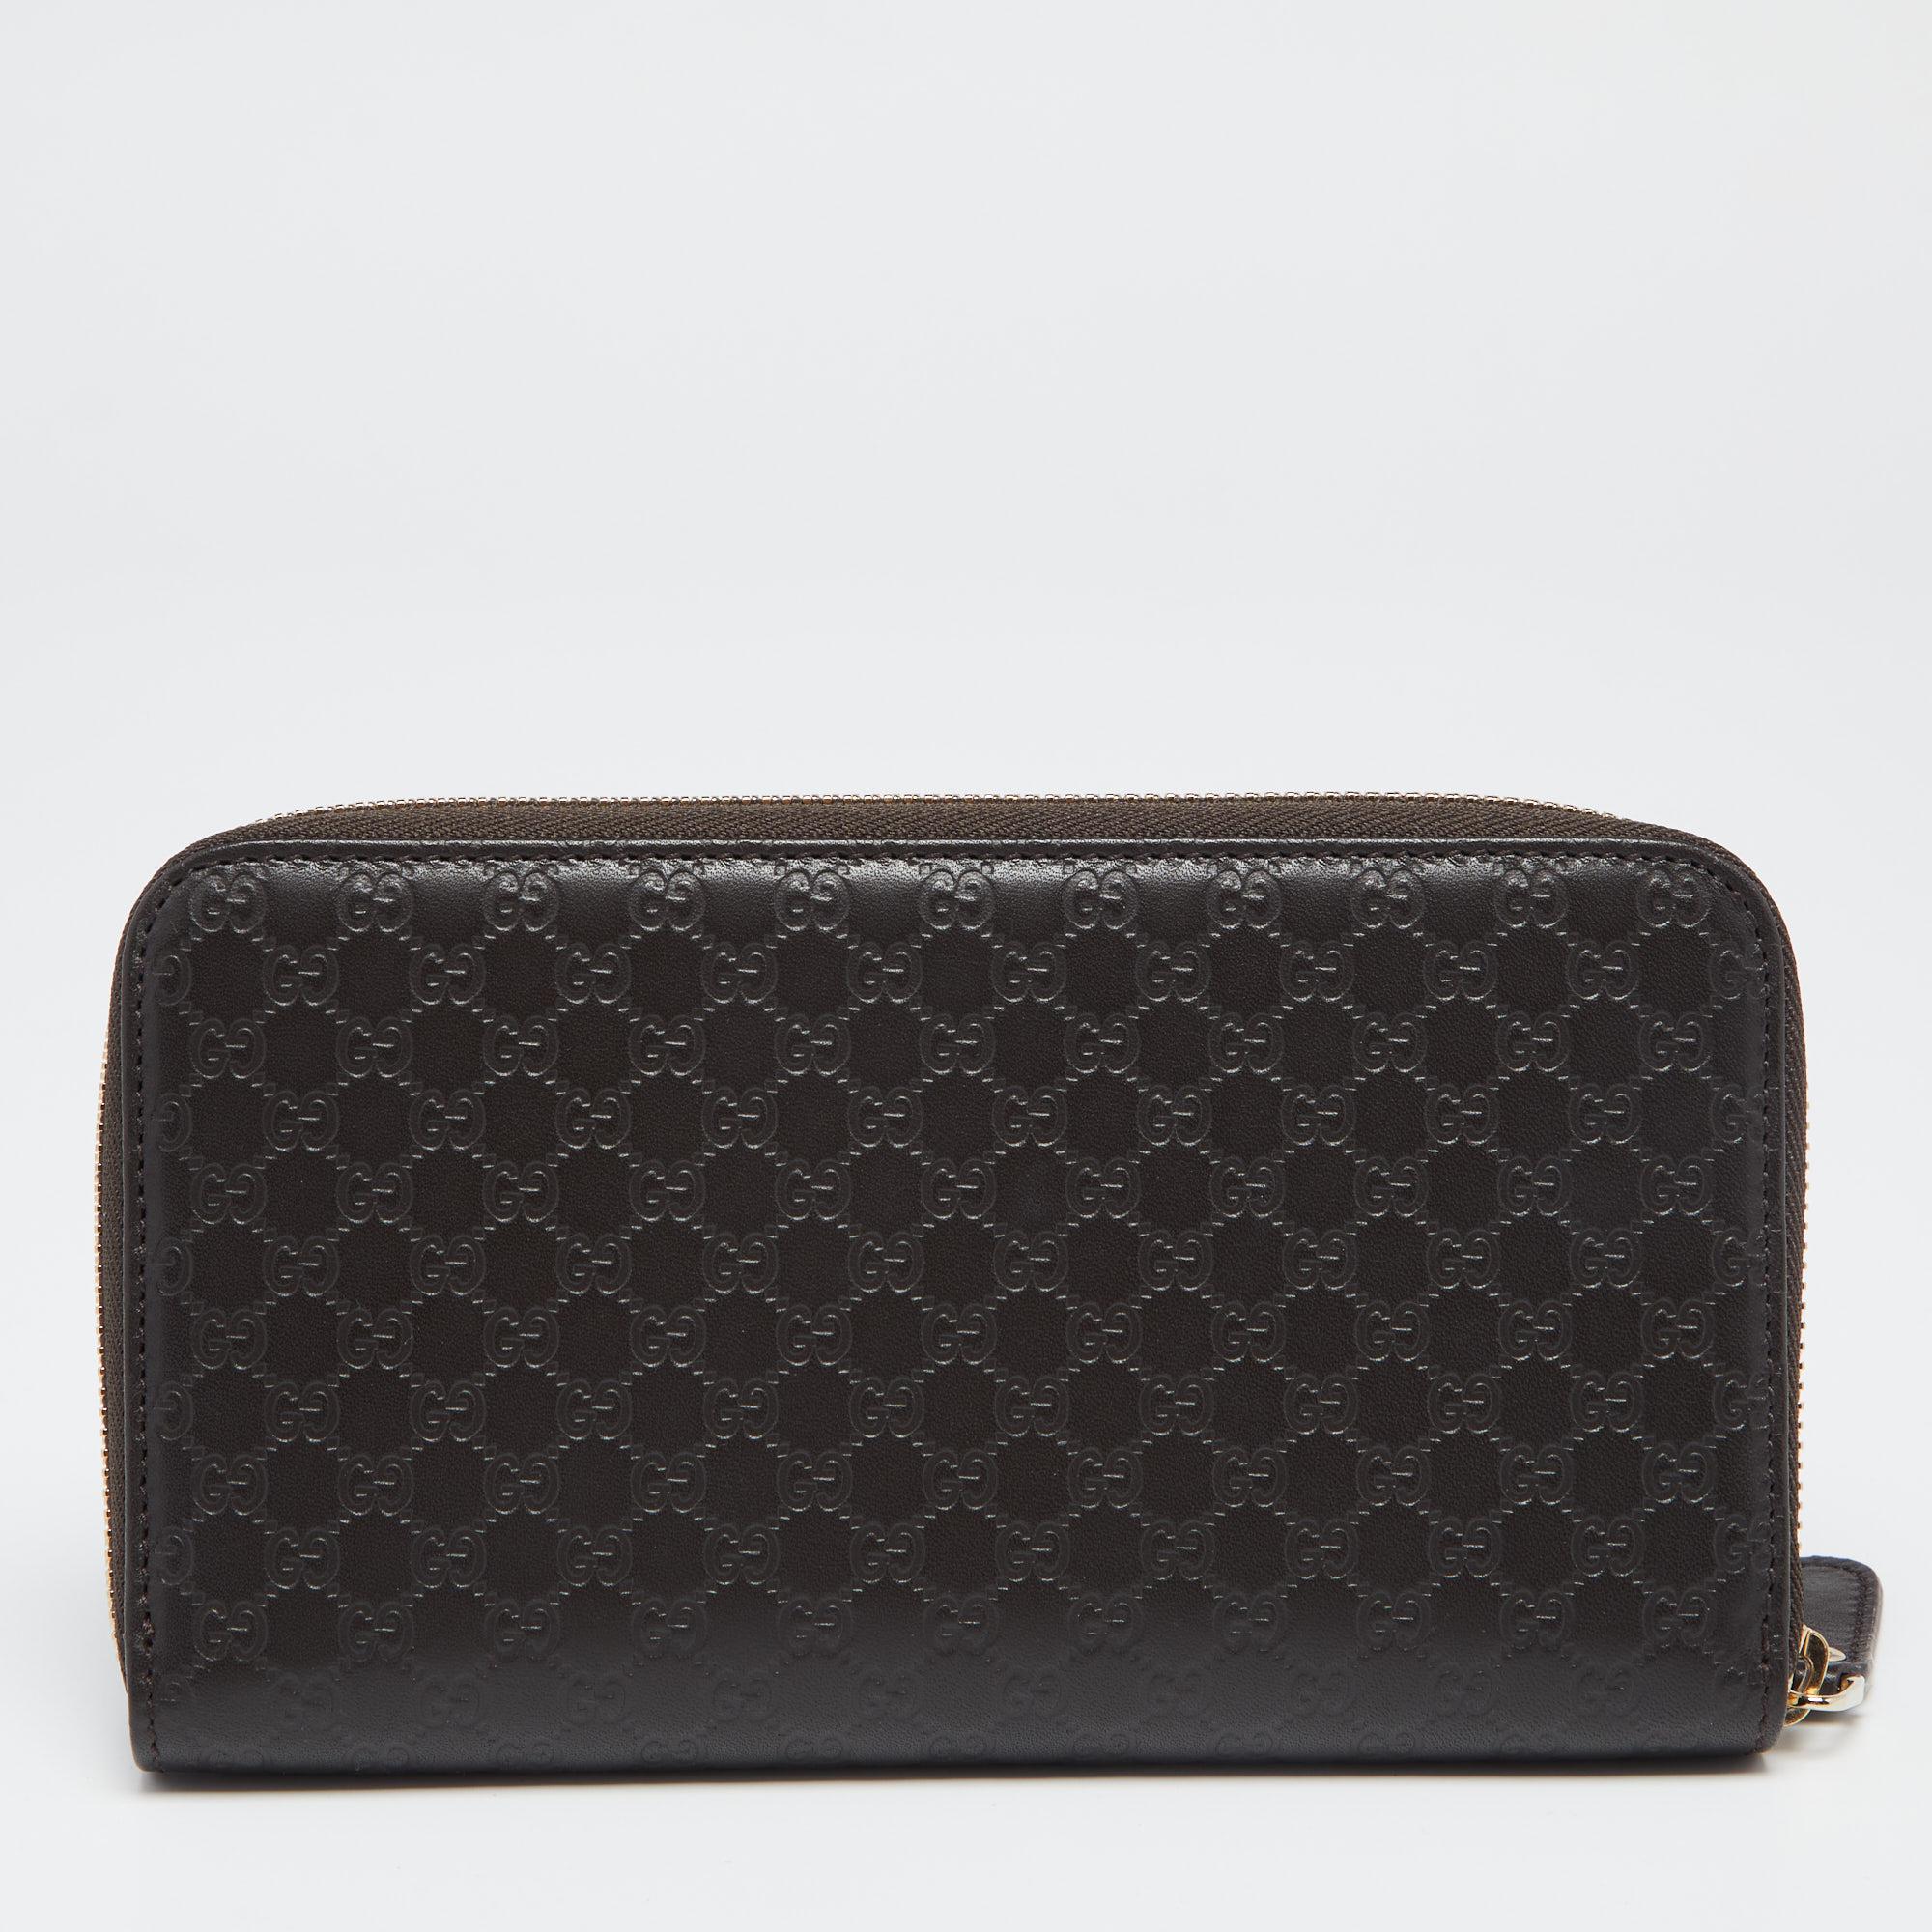 This Gucci wallet is an immaculate balance of sophistication and rational utility. It has been designed using prime quality materials and elevated by a sleek finish. The creation is equipped with ample space for your monetary essentials.

Includes: